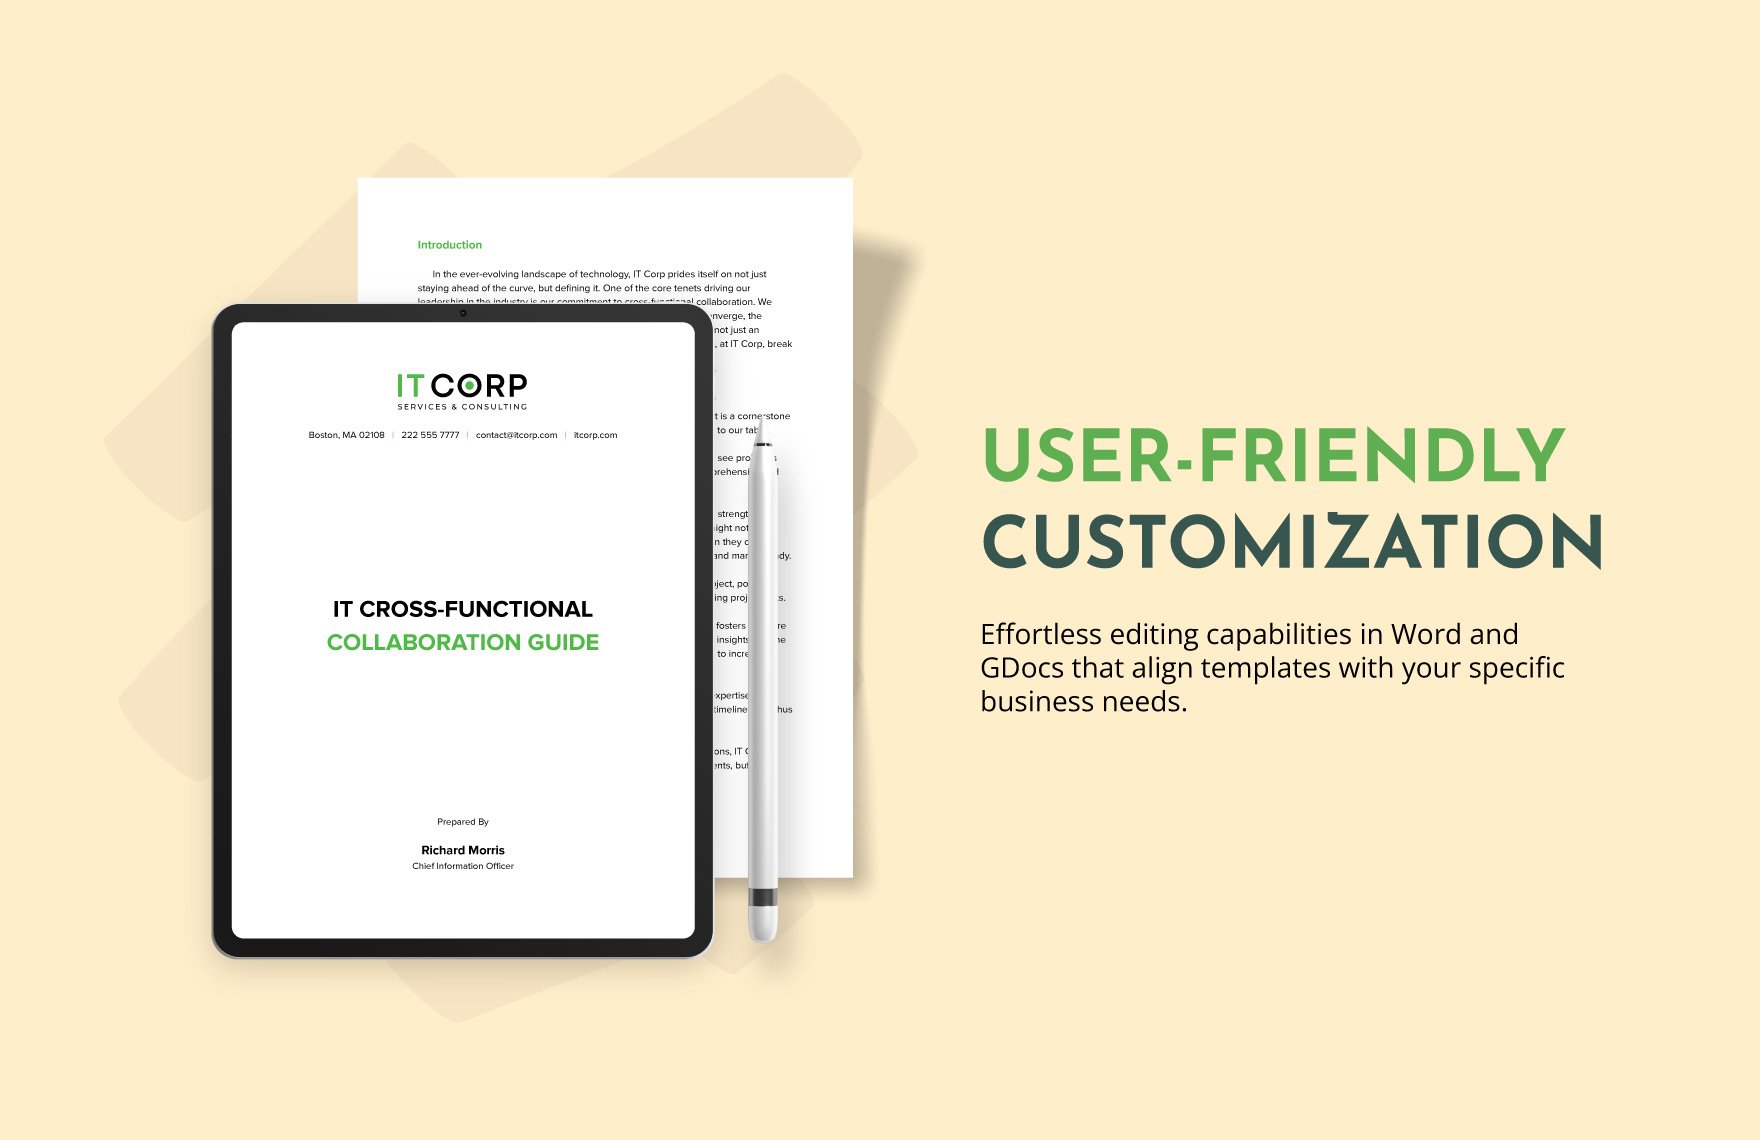 IT Cross-Functional Collaboration Guide Template